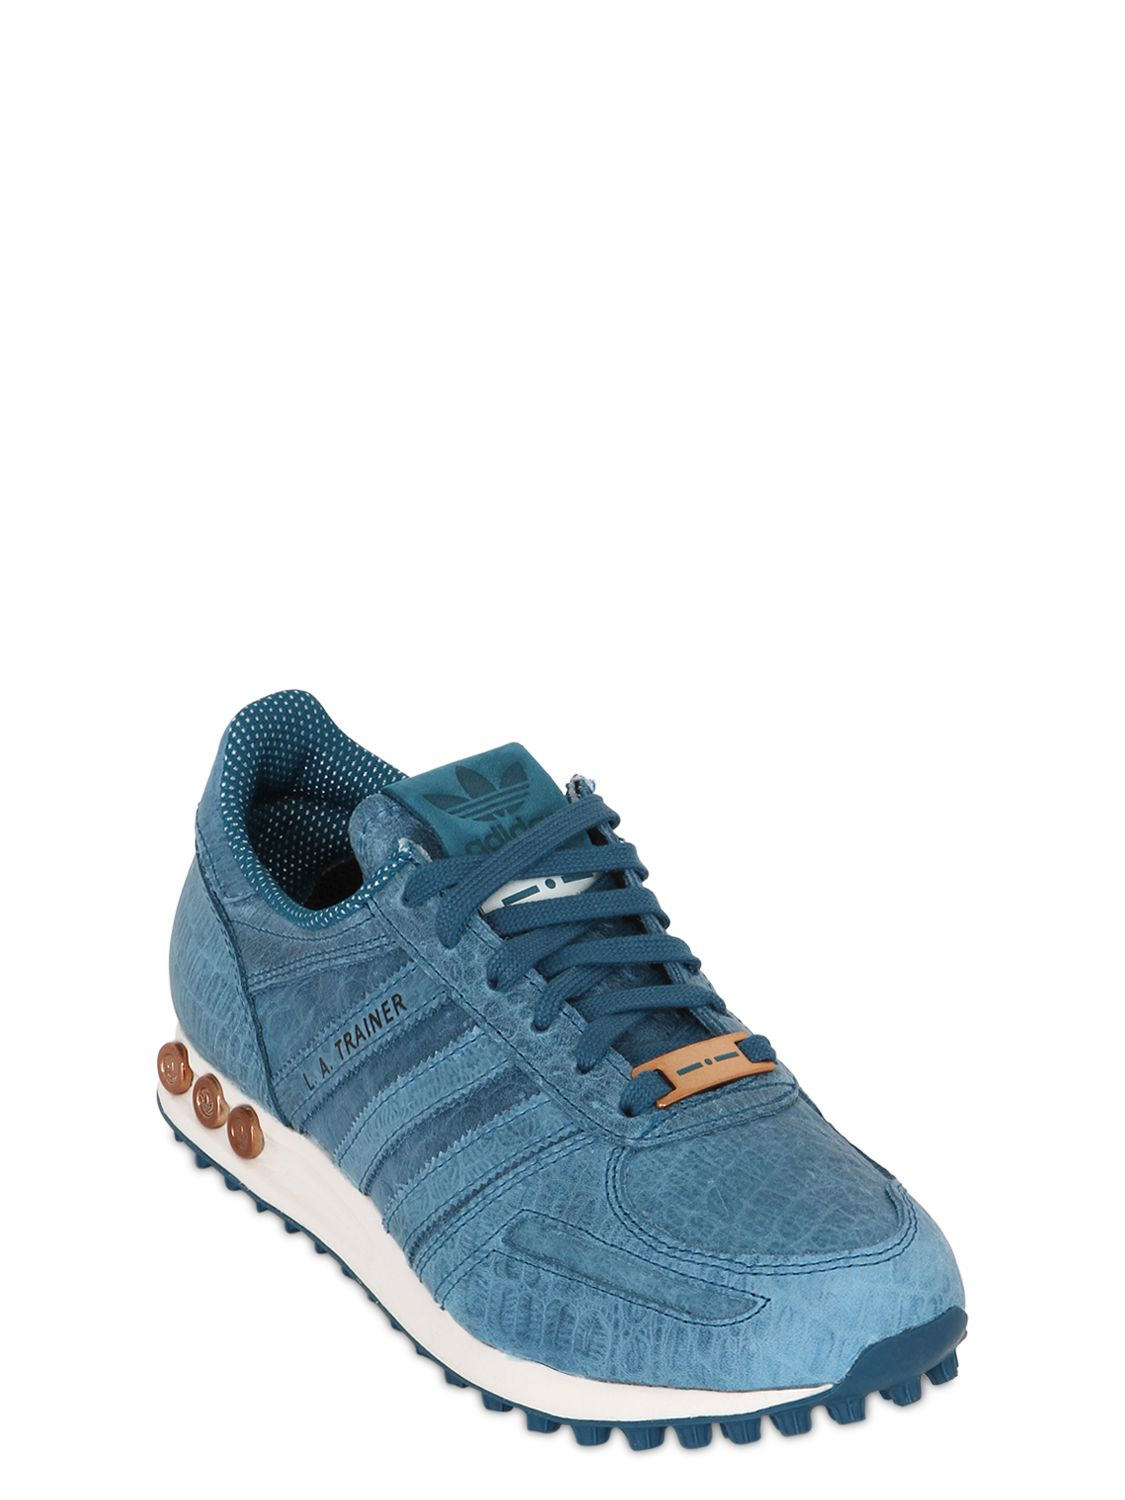 adidas Originals La Trainer Embossed Leather Sneakers in Light Blue (Blue)  - Lyst